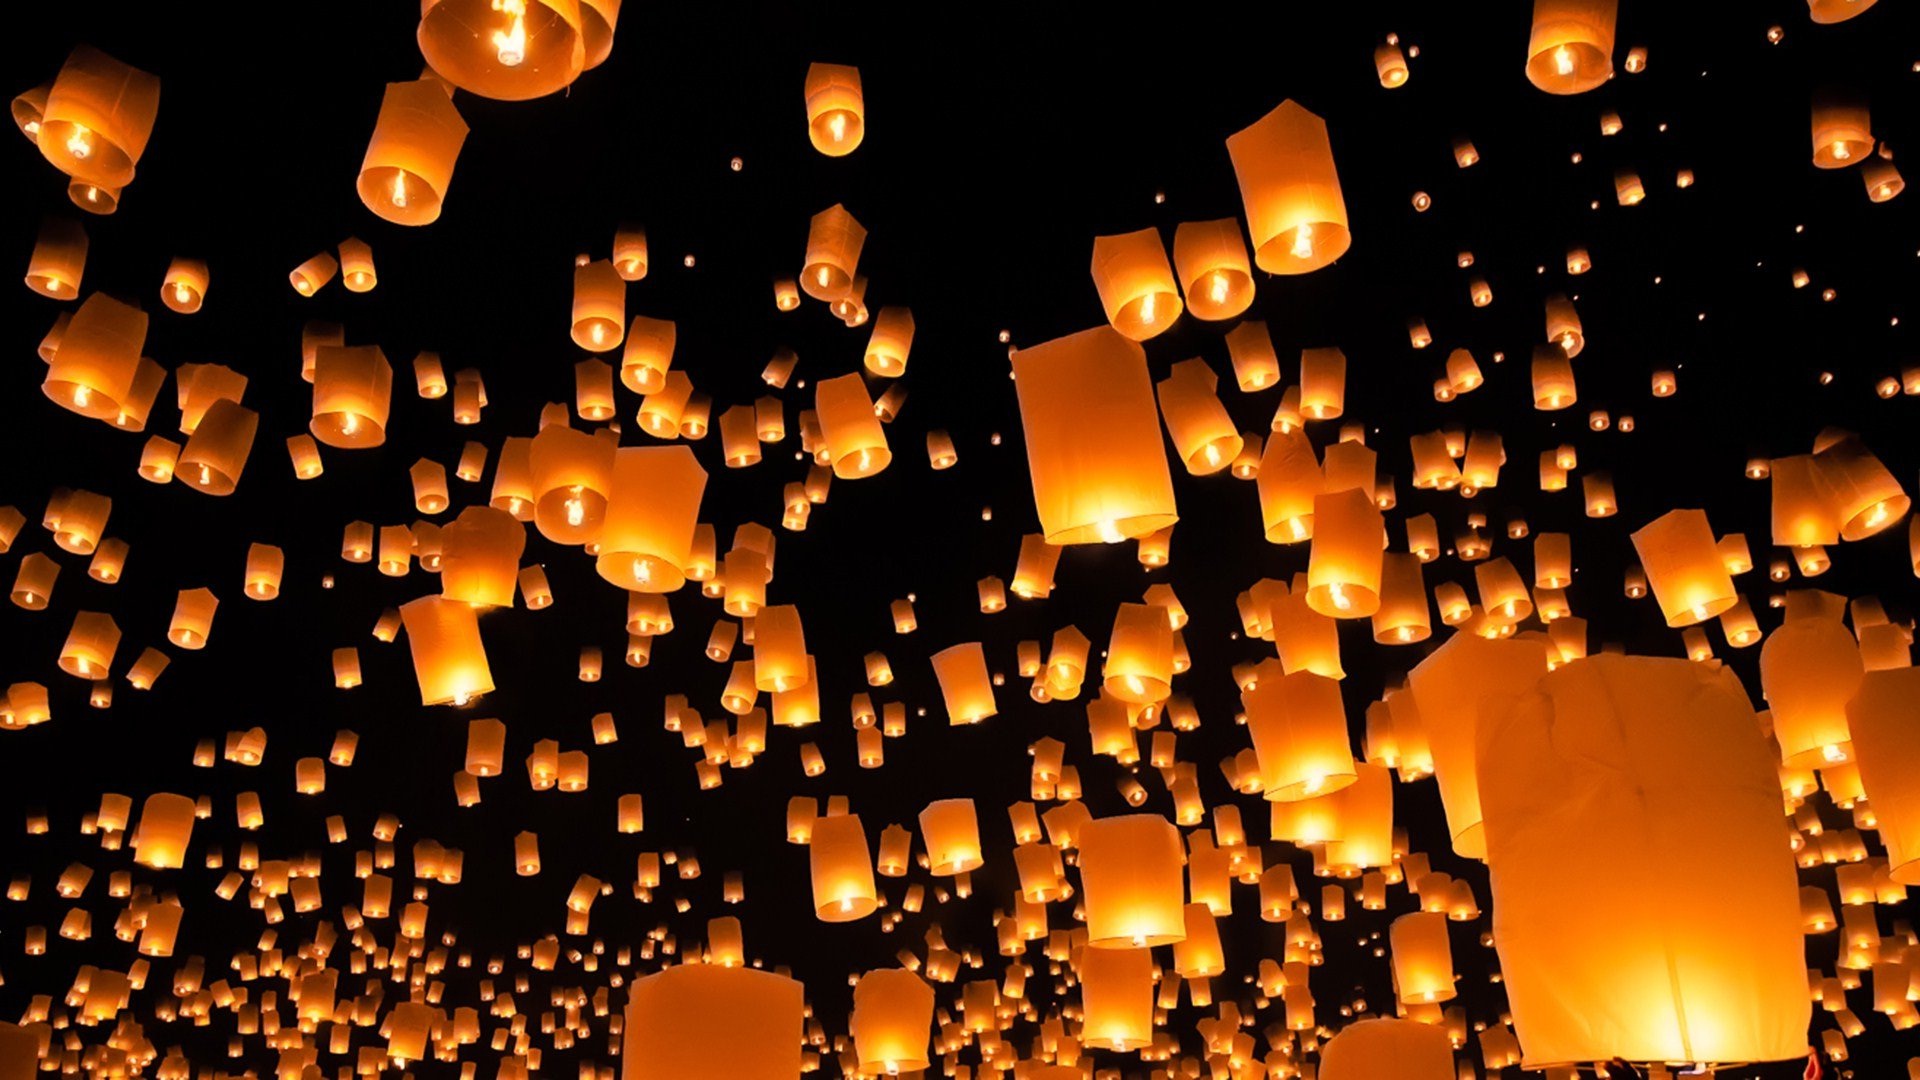 Candle Lights Flying Amazing Wallpapers 101 Awesome - Photography Desktop Background Hd - HD Wallpaper 